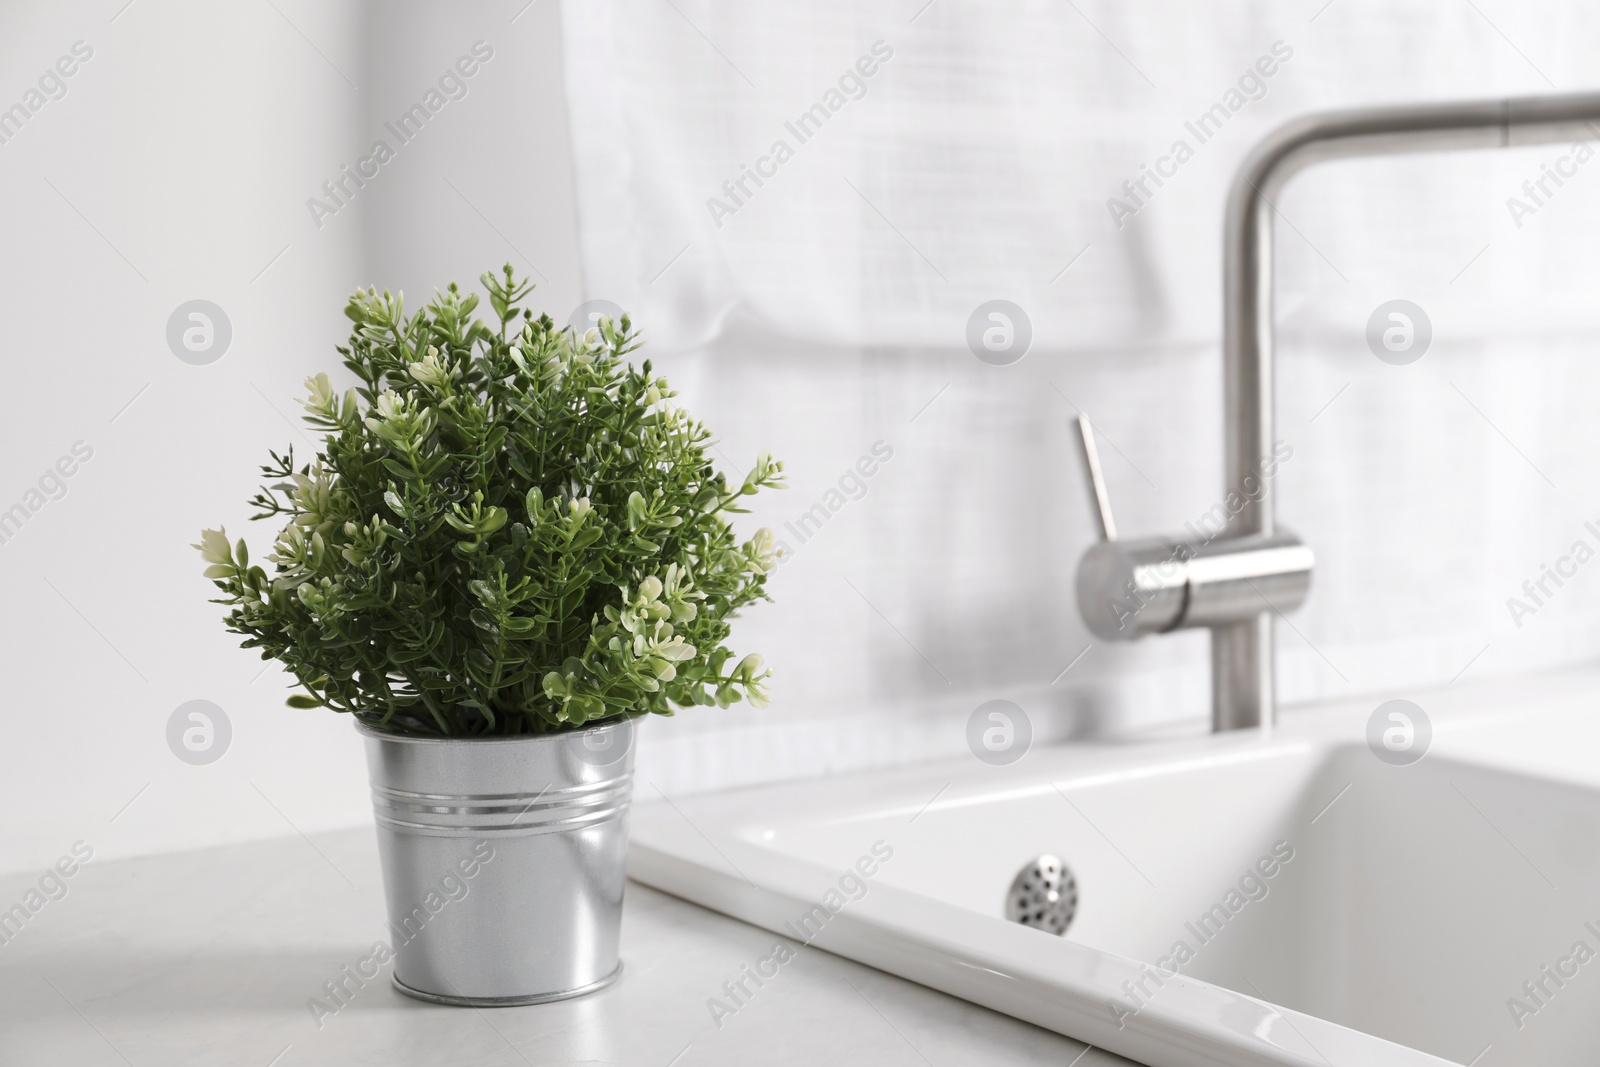 Photo of Artificial potted herb on white marble countertop near sink in kitchen, space for text. Home decor